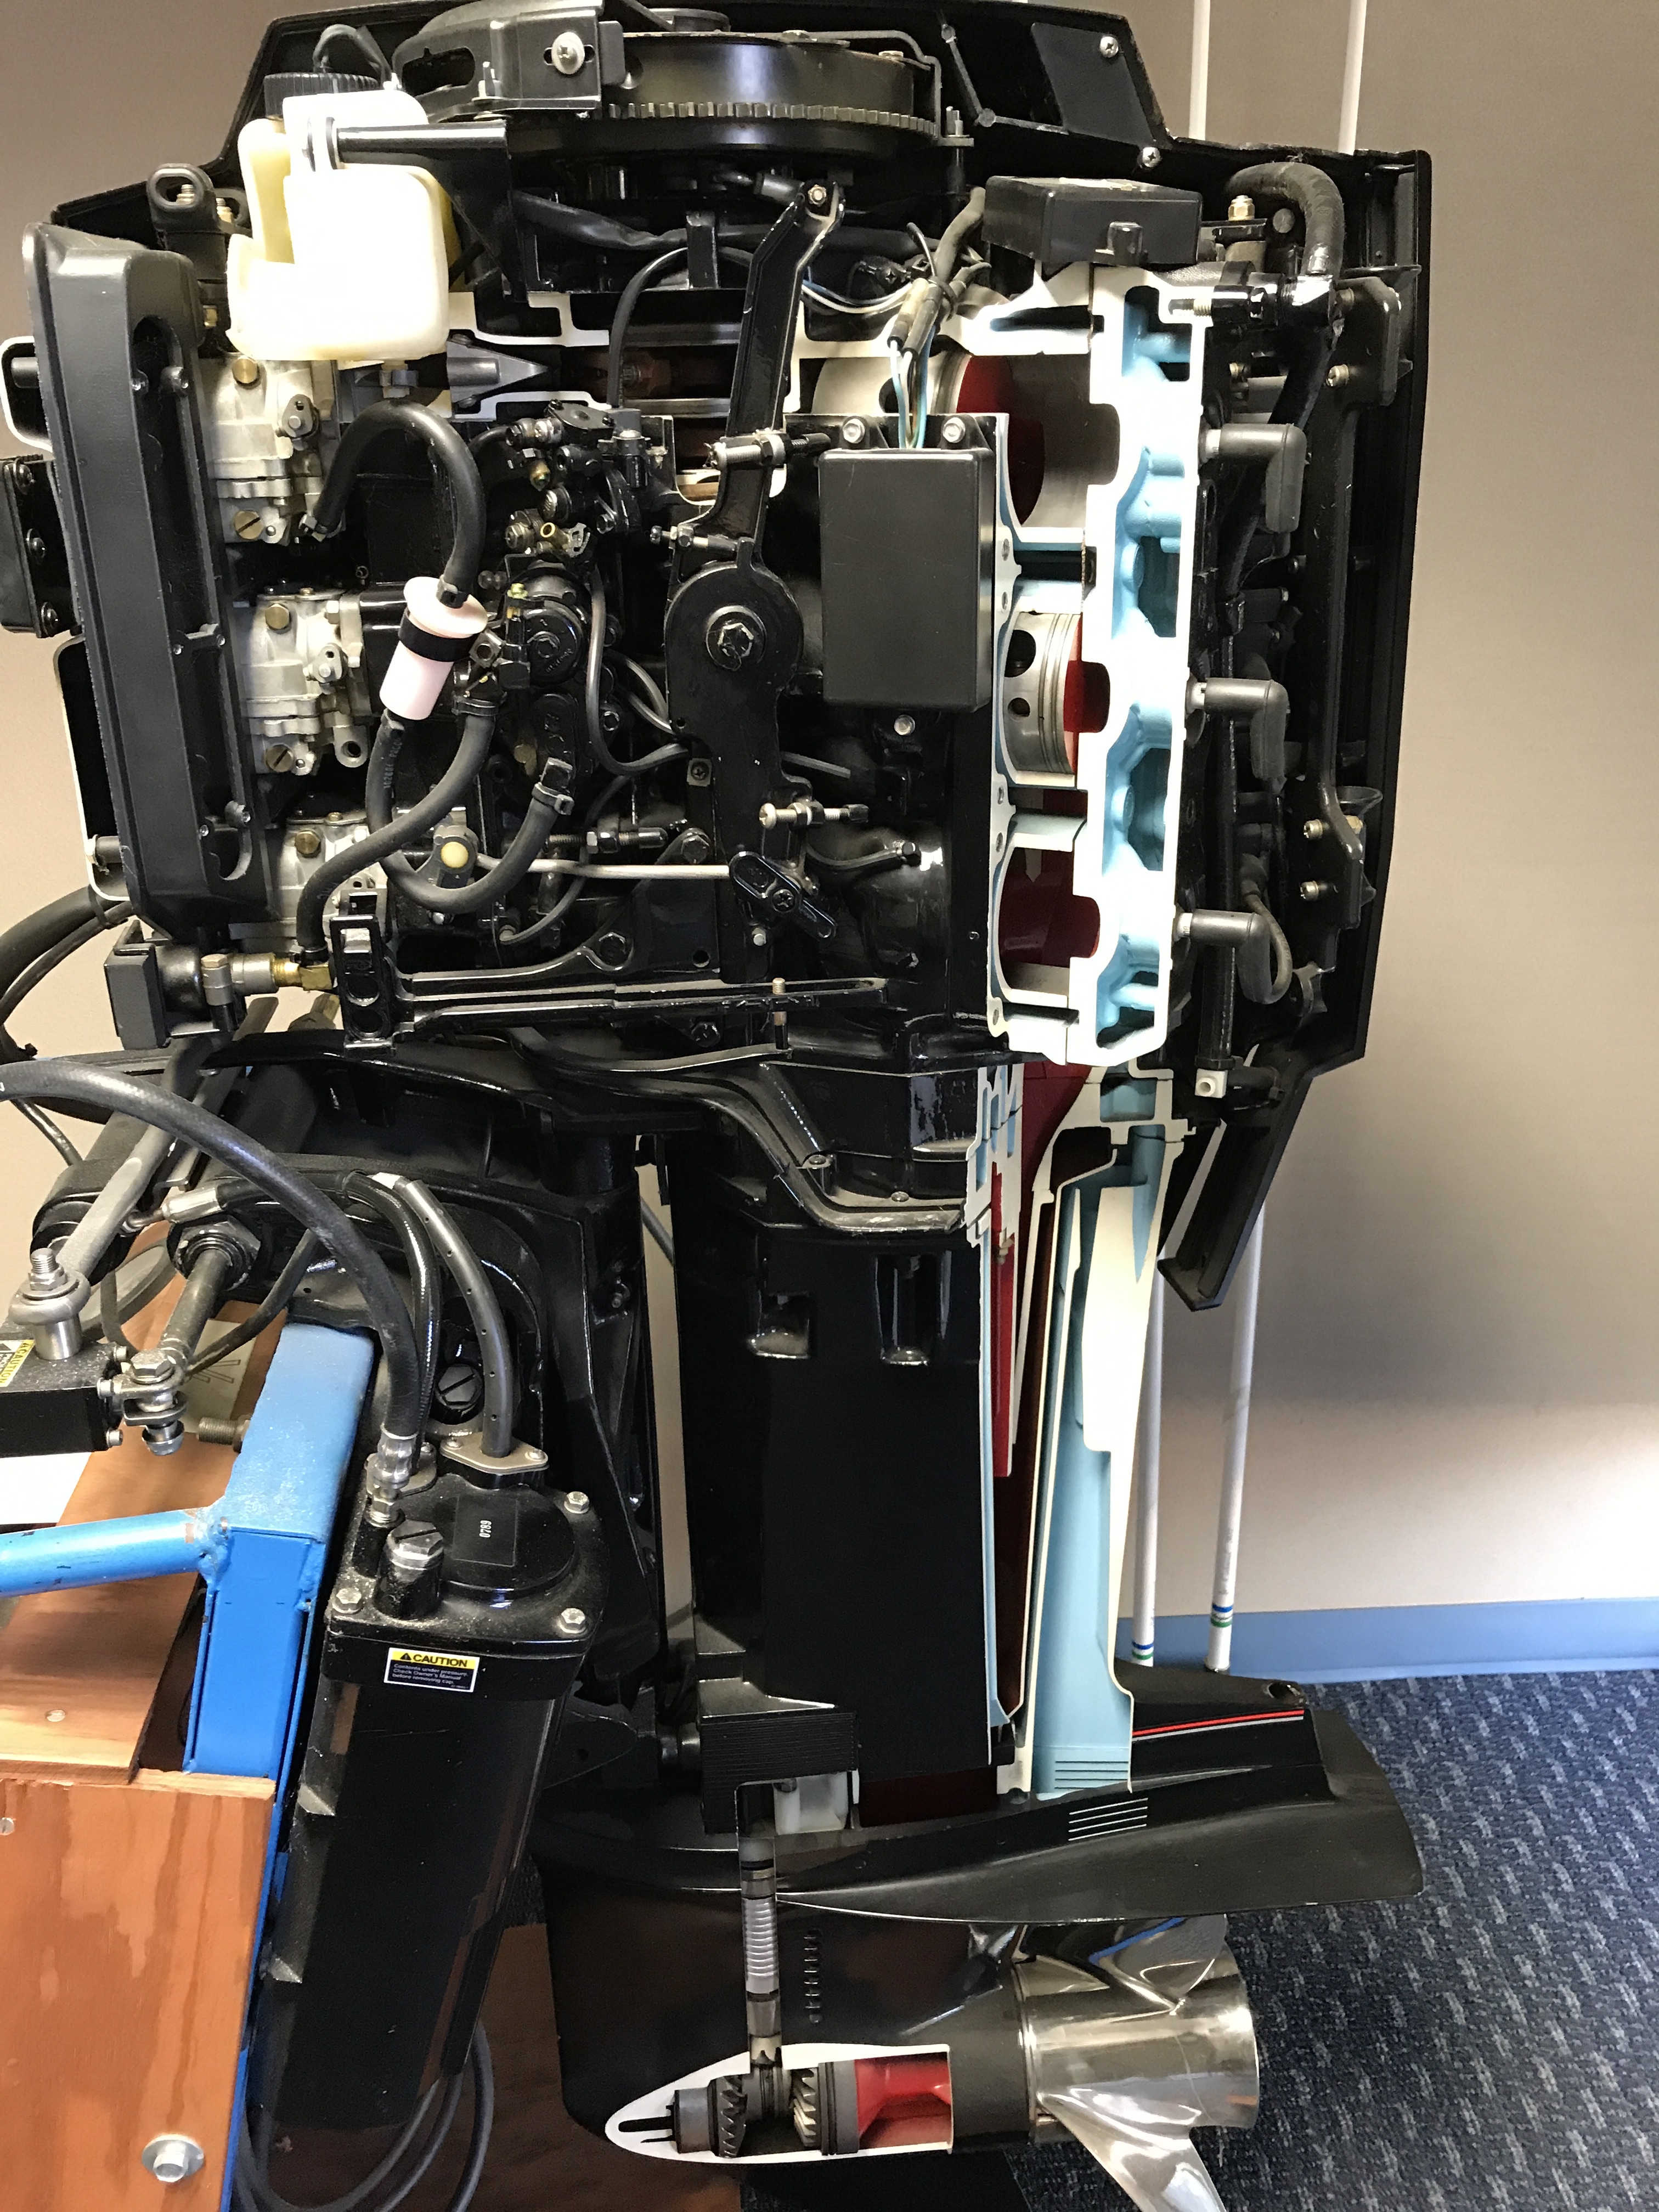 Internals of a Mercury Outboard engine